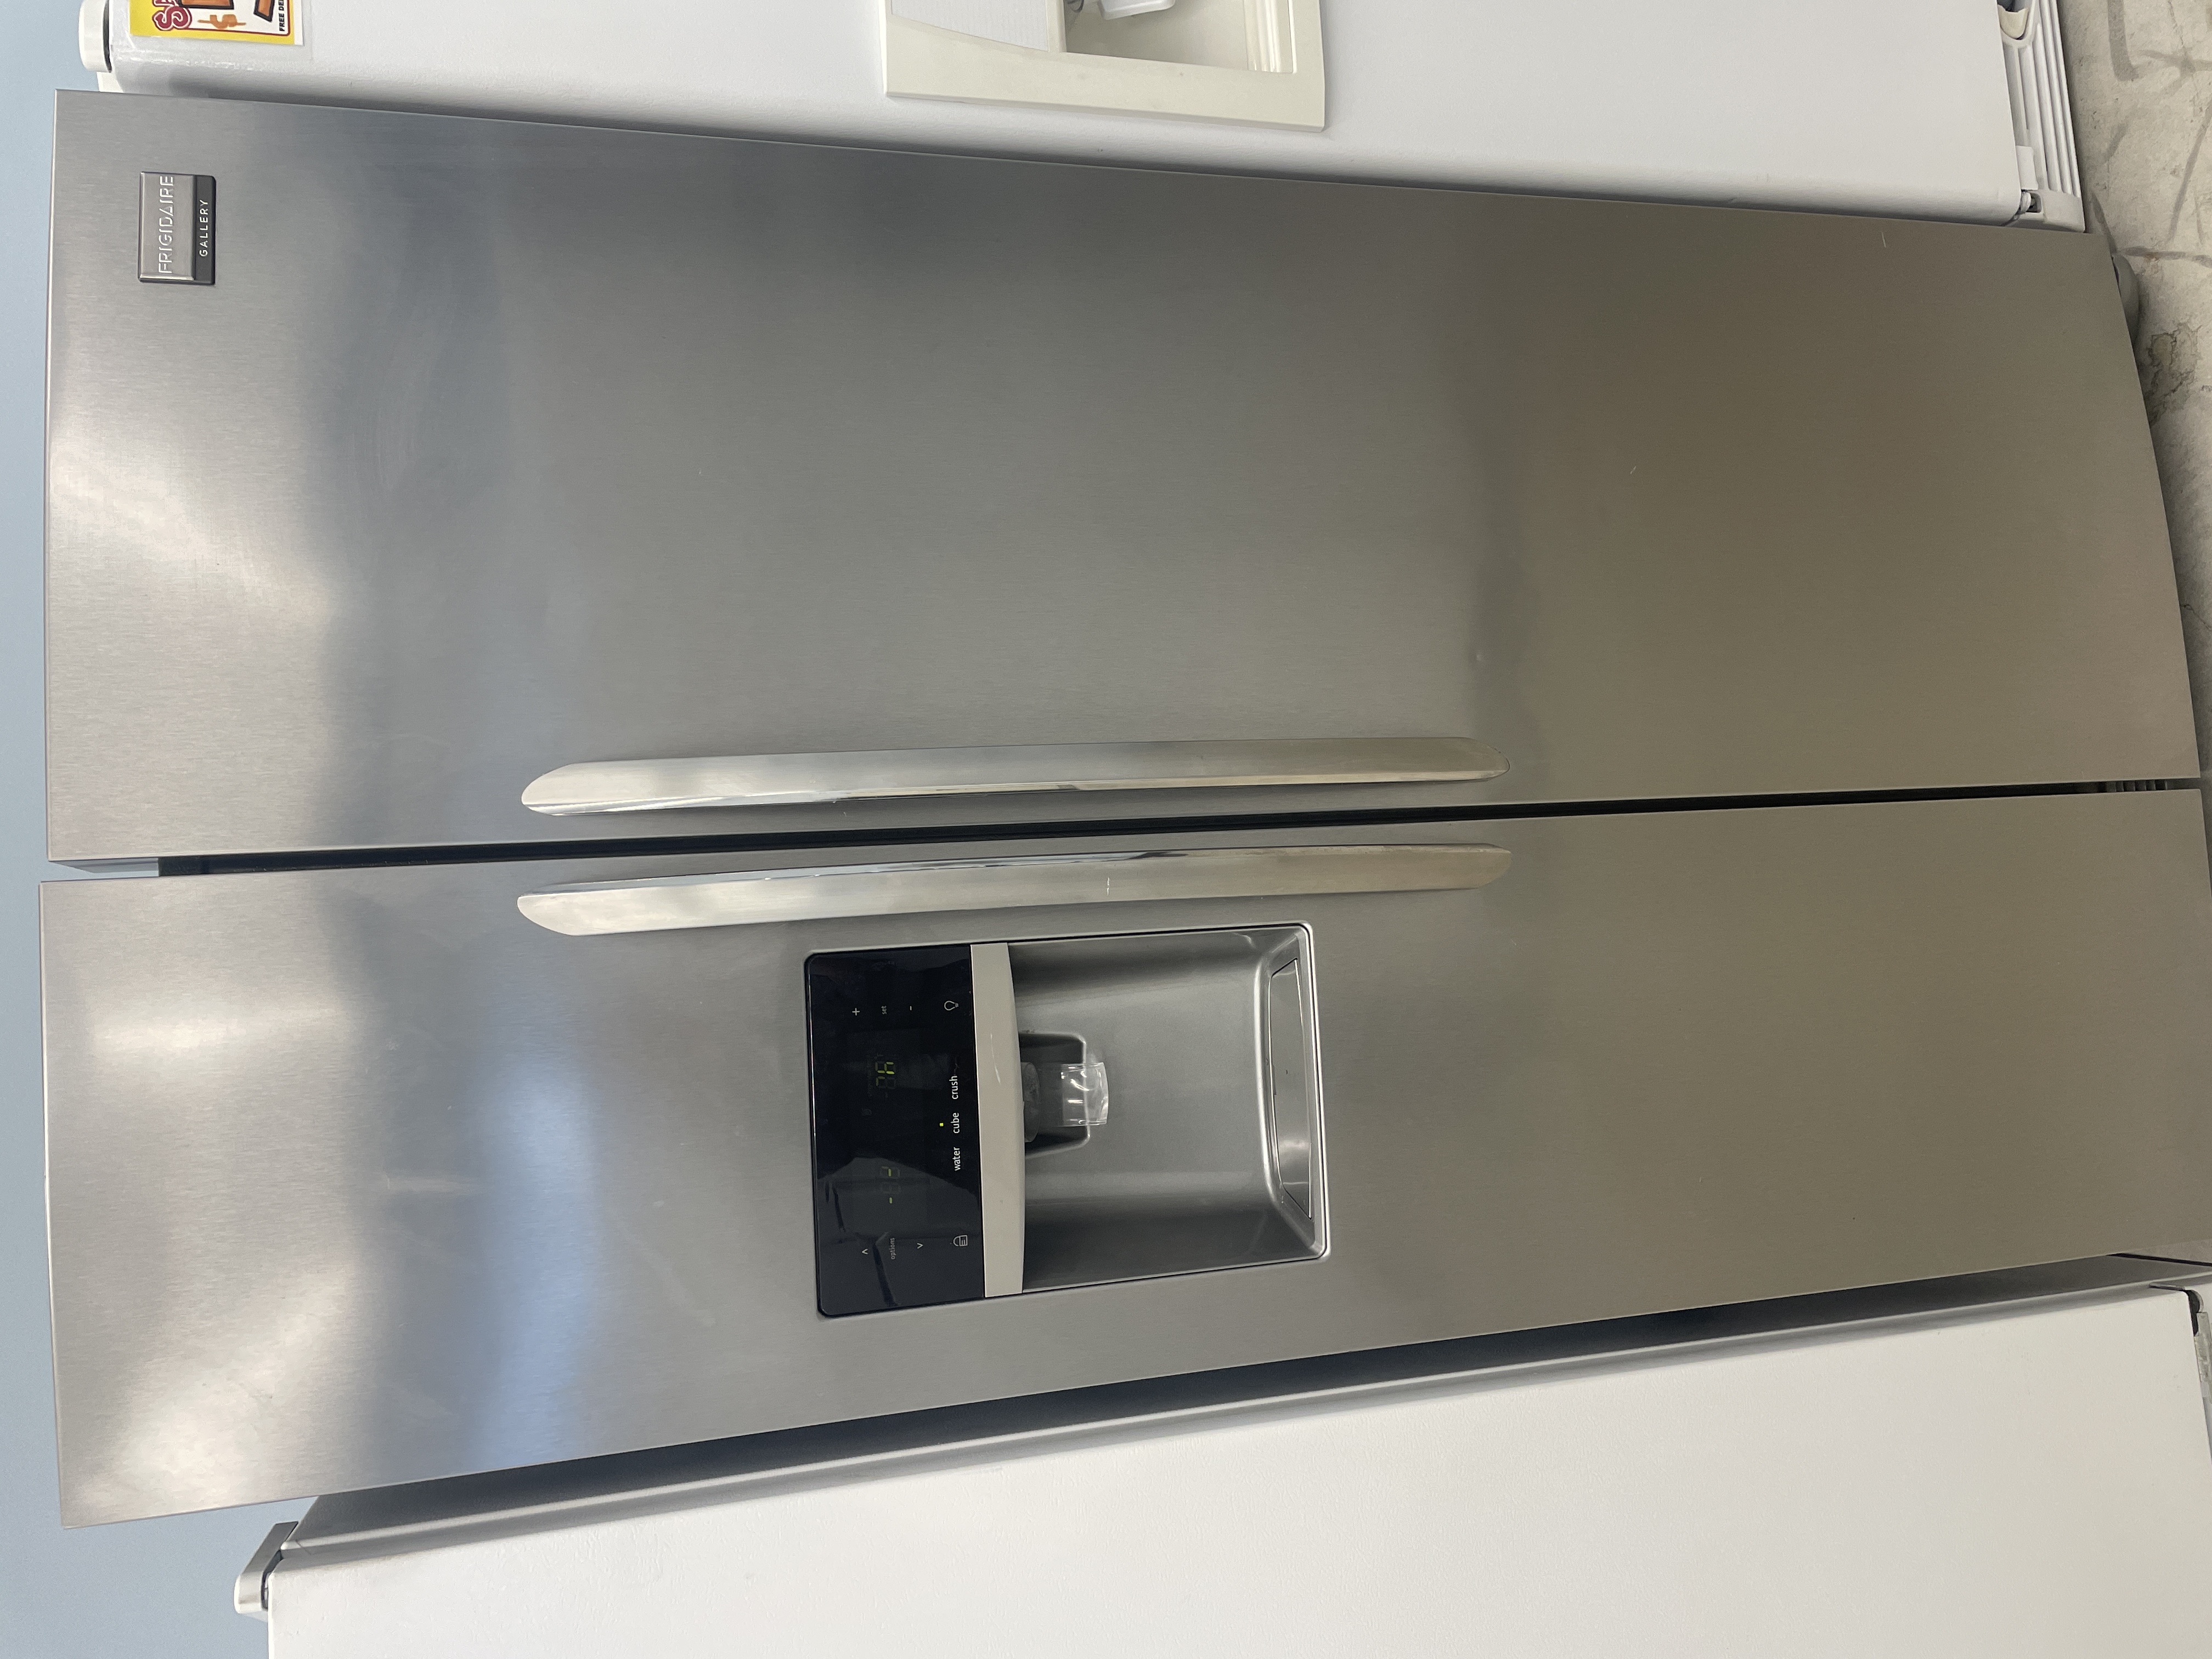 Frigidaire refrigerator Stainless steel ..side by side